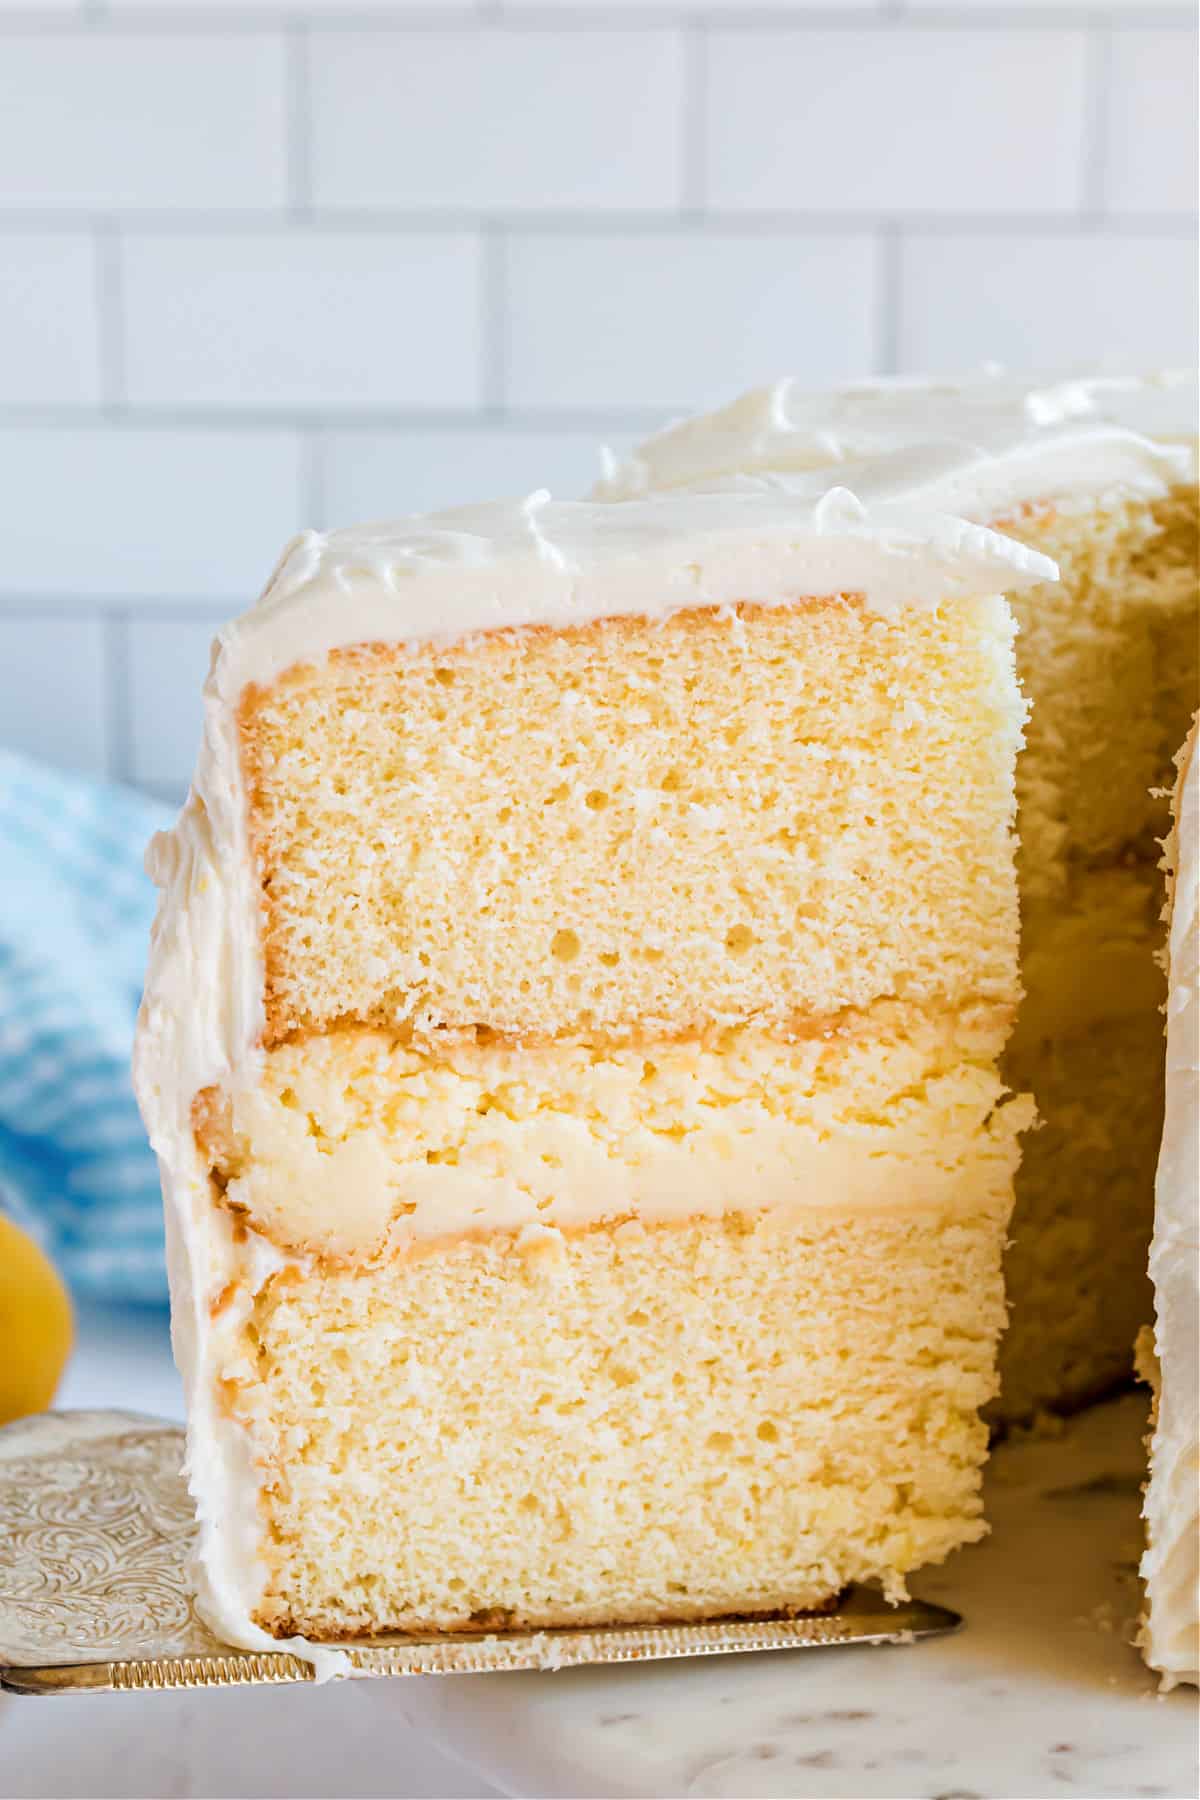 Slice of cake with two layers of lemon cake, cheesecake filling, and covered in frosting.